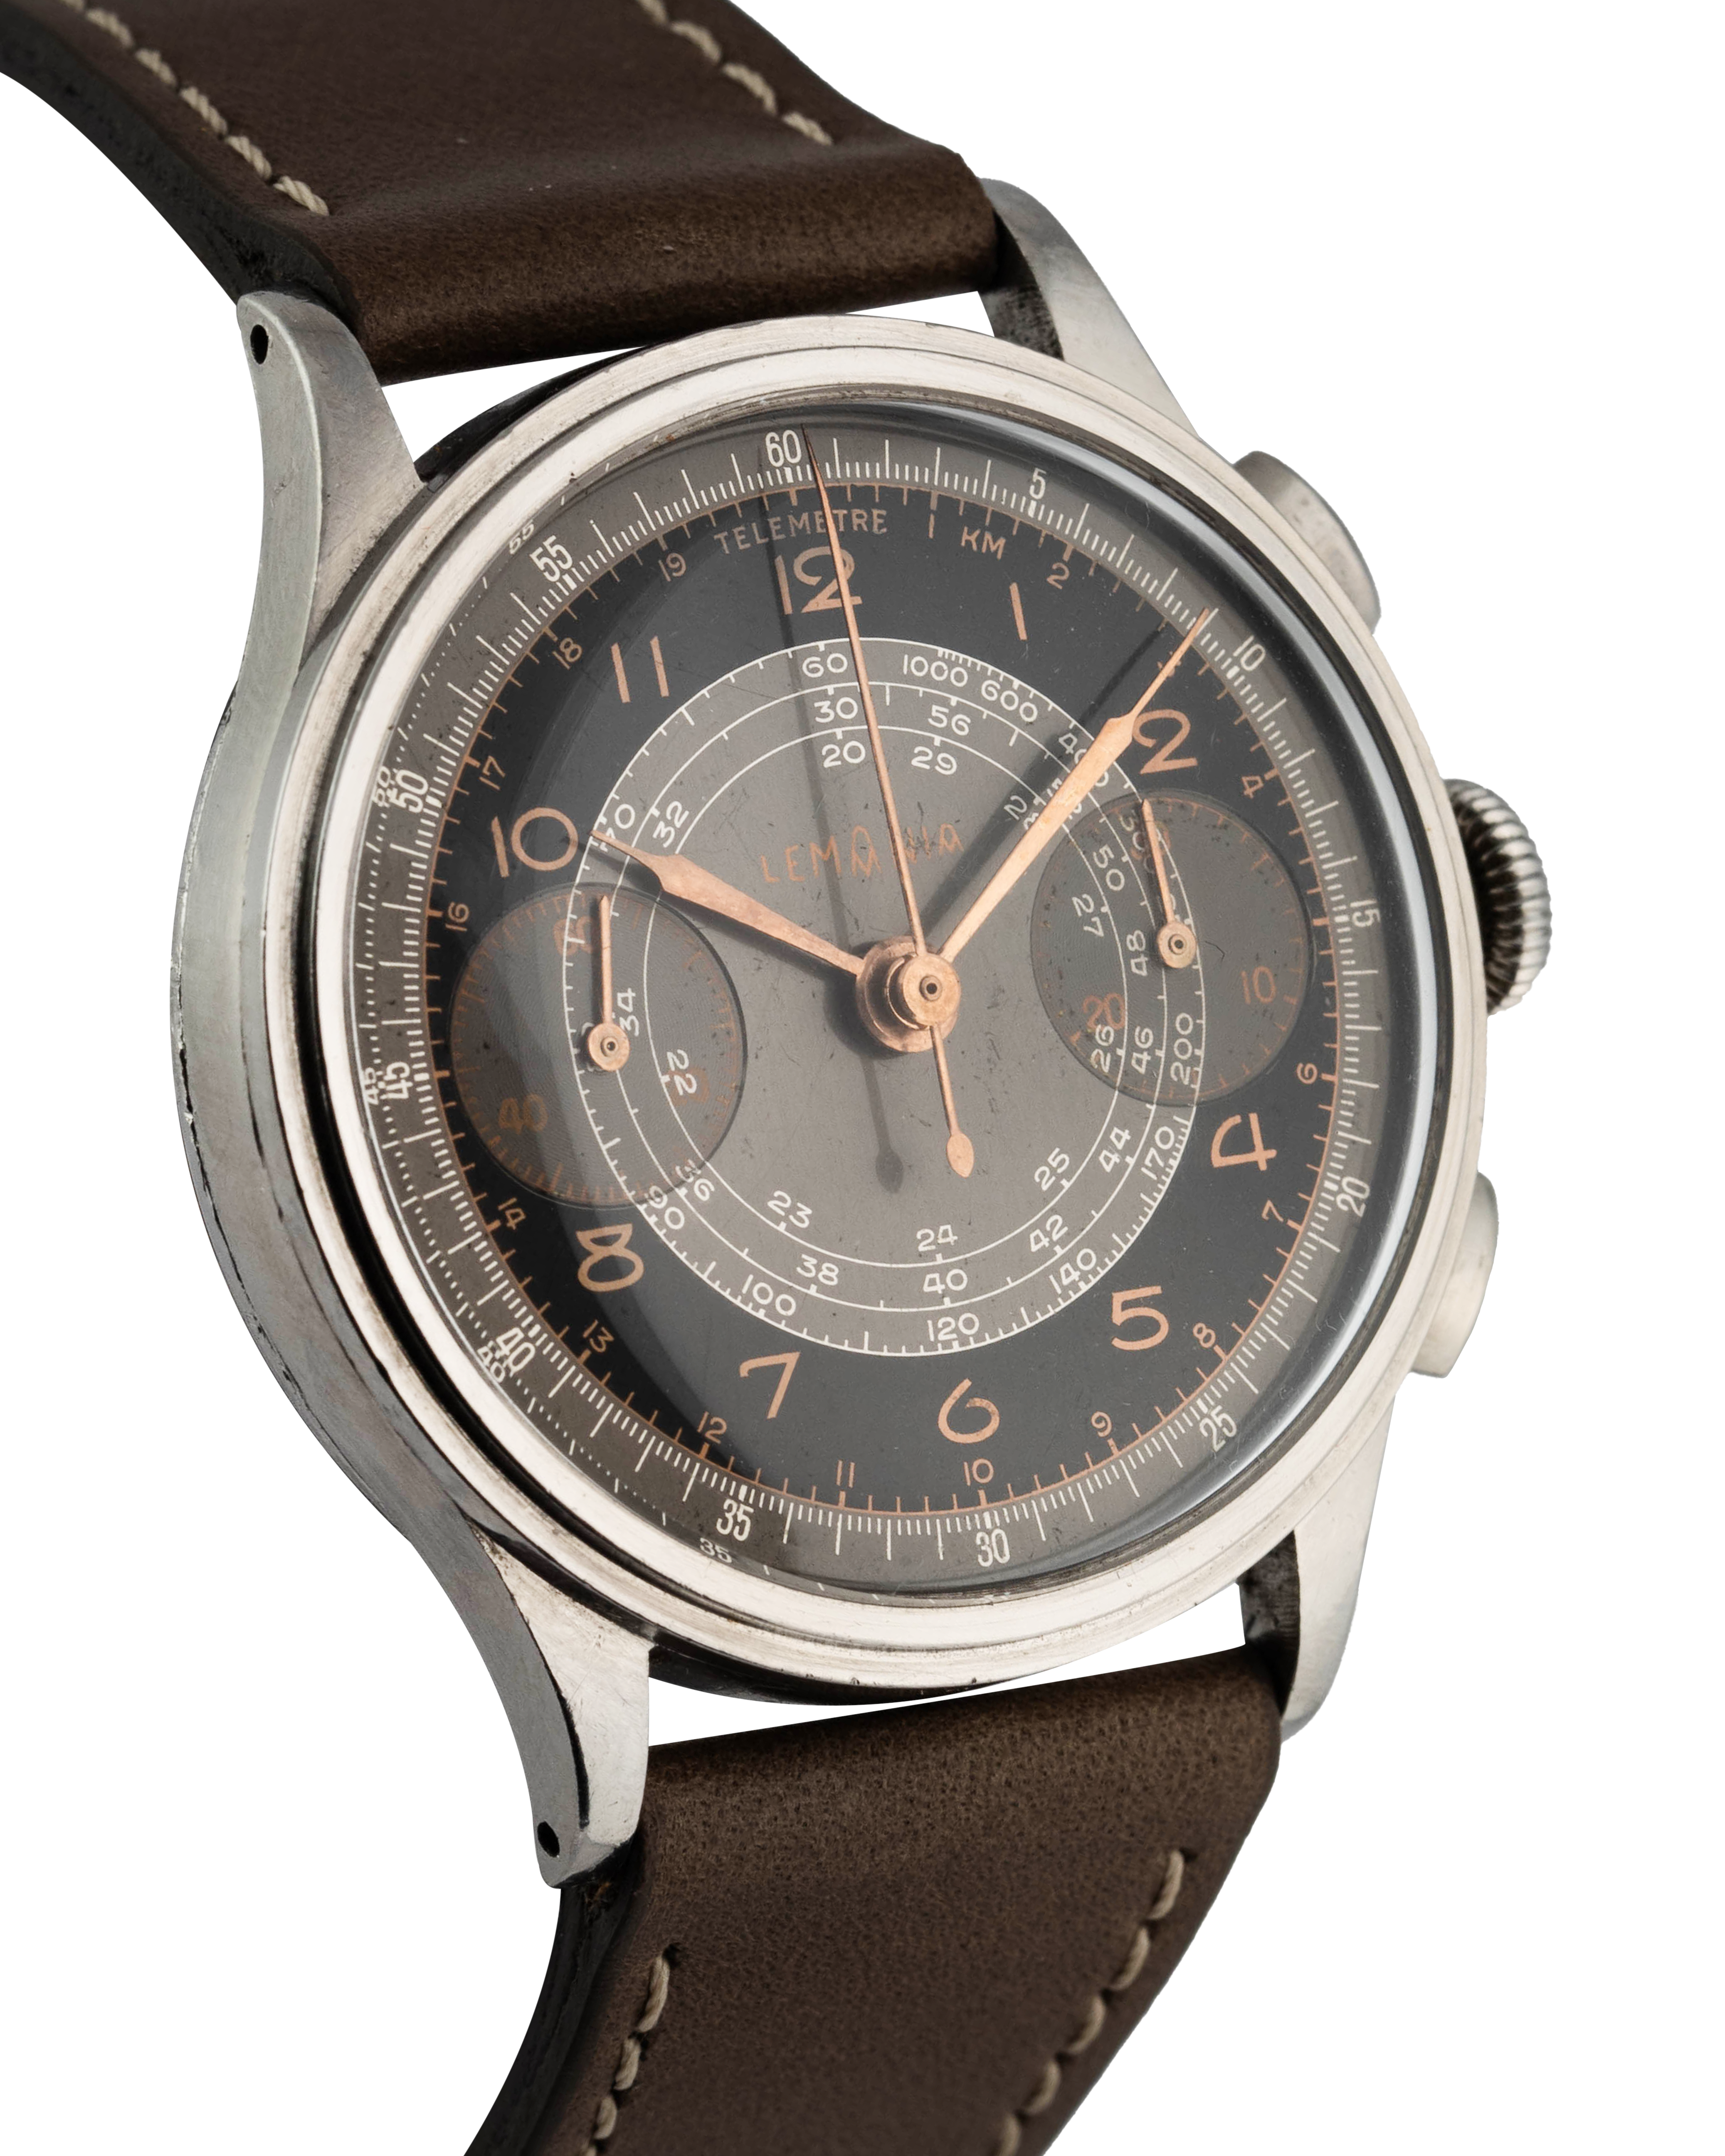 Lemania Oversize Chronograph - black and grey dial - stainless steel 